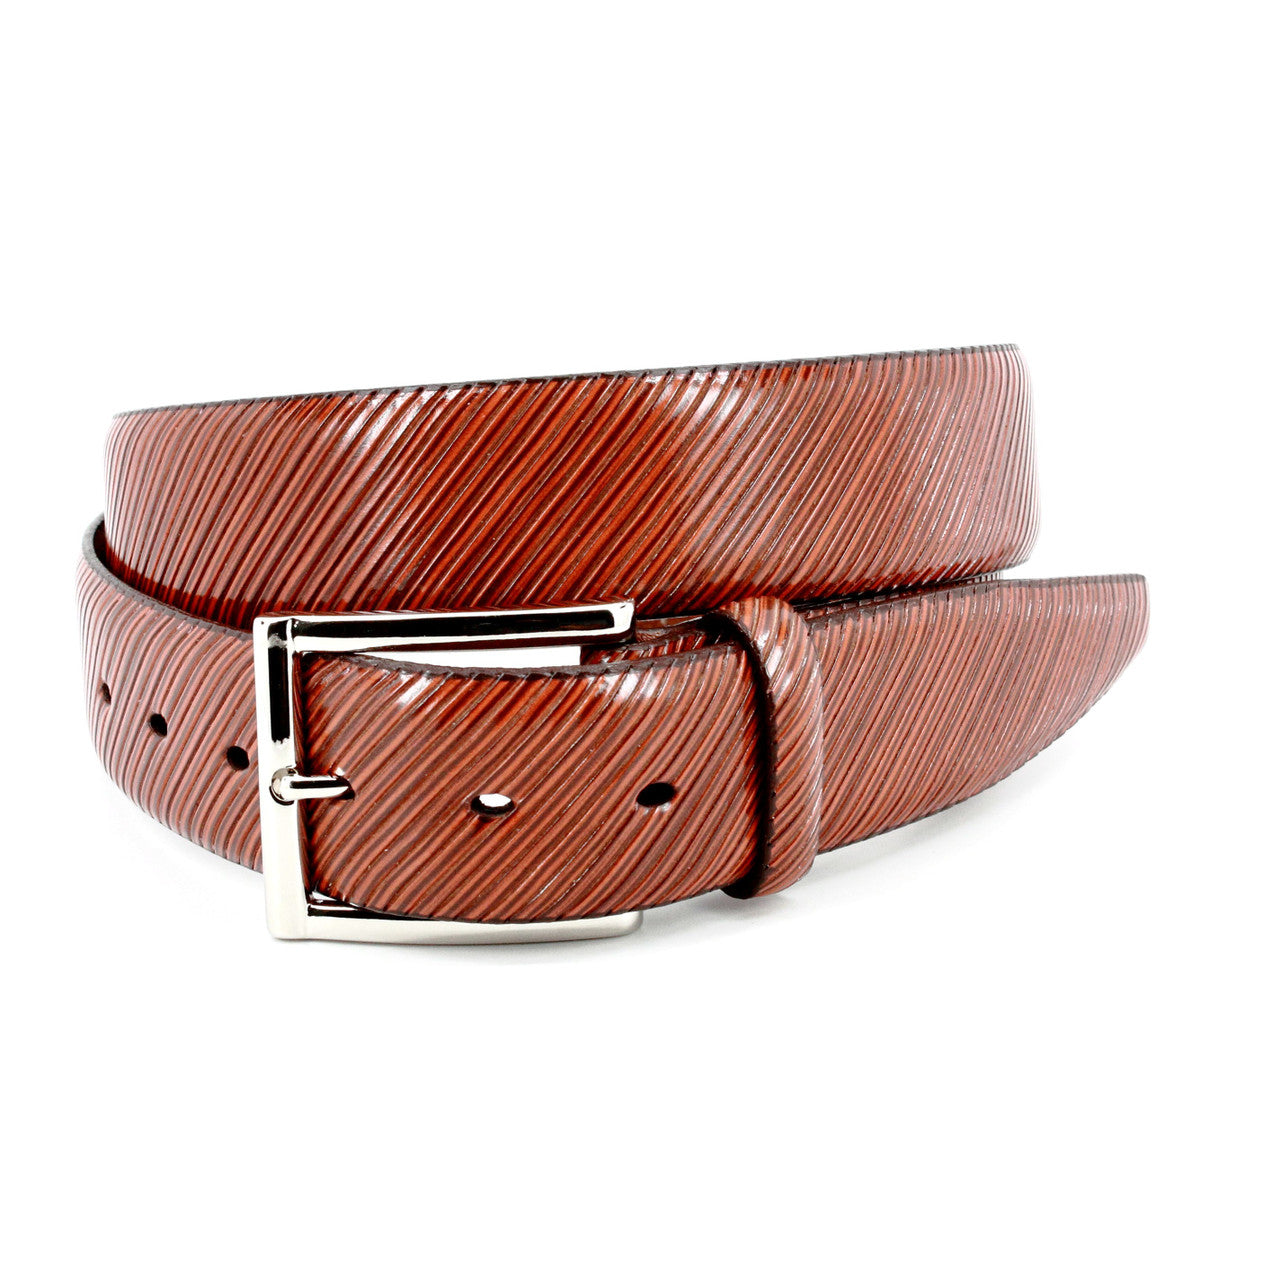 Diagonal Etched Italian Calfskin Dress Casual Belt in Cognac by Torino Leather